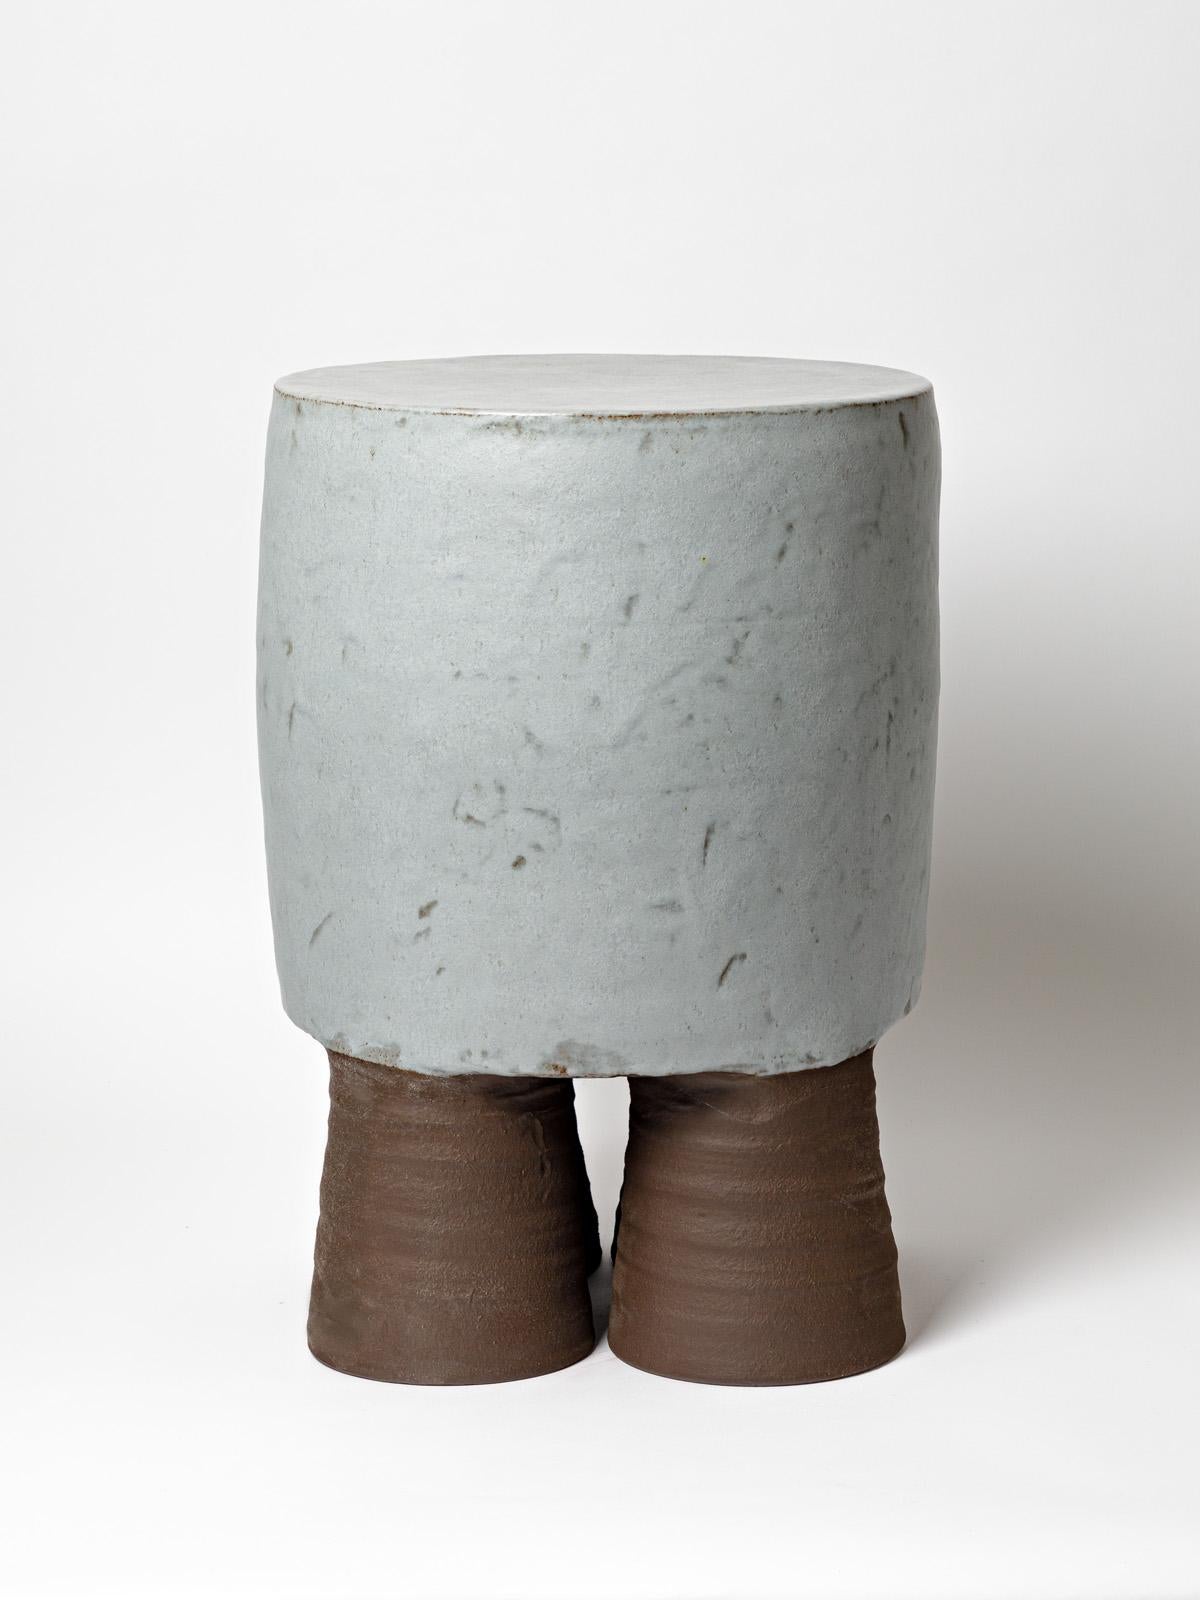 Contemporary Ceramic Stool or Table with Glazes Decoration by Mia Jensen, circa 2022 For Sale